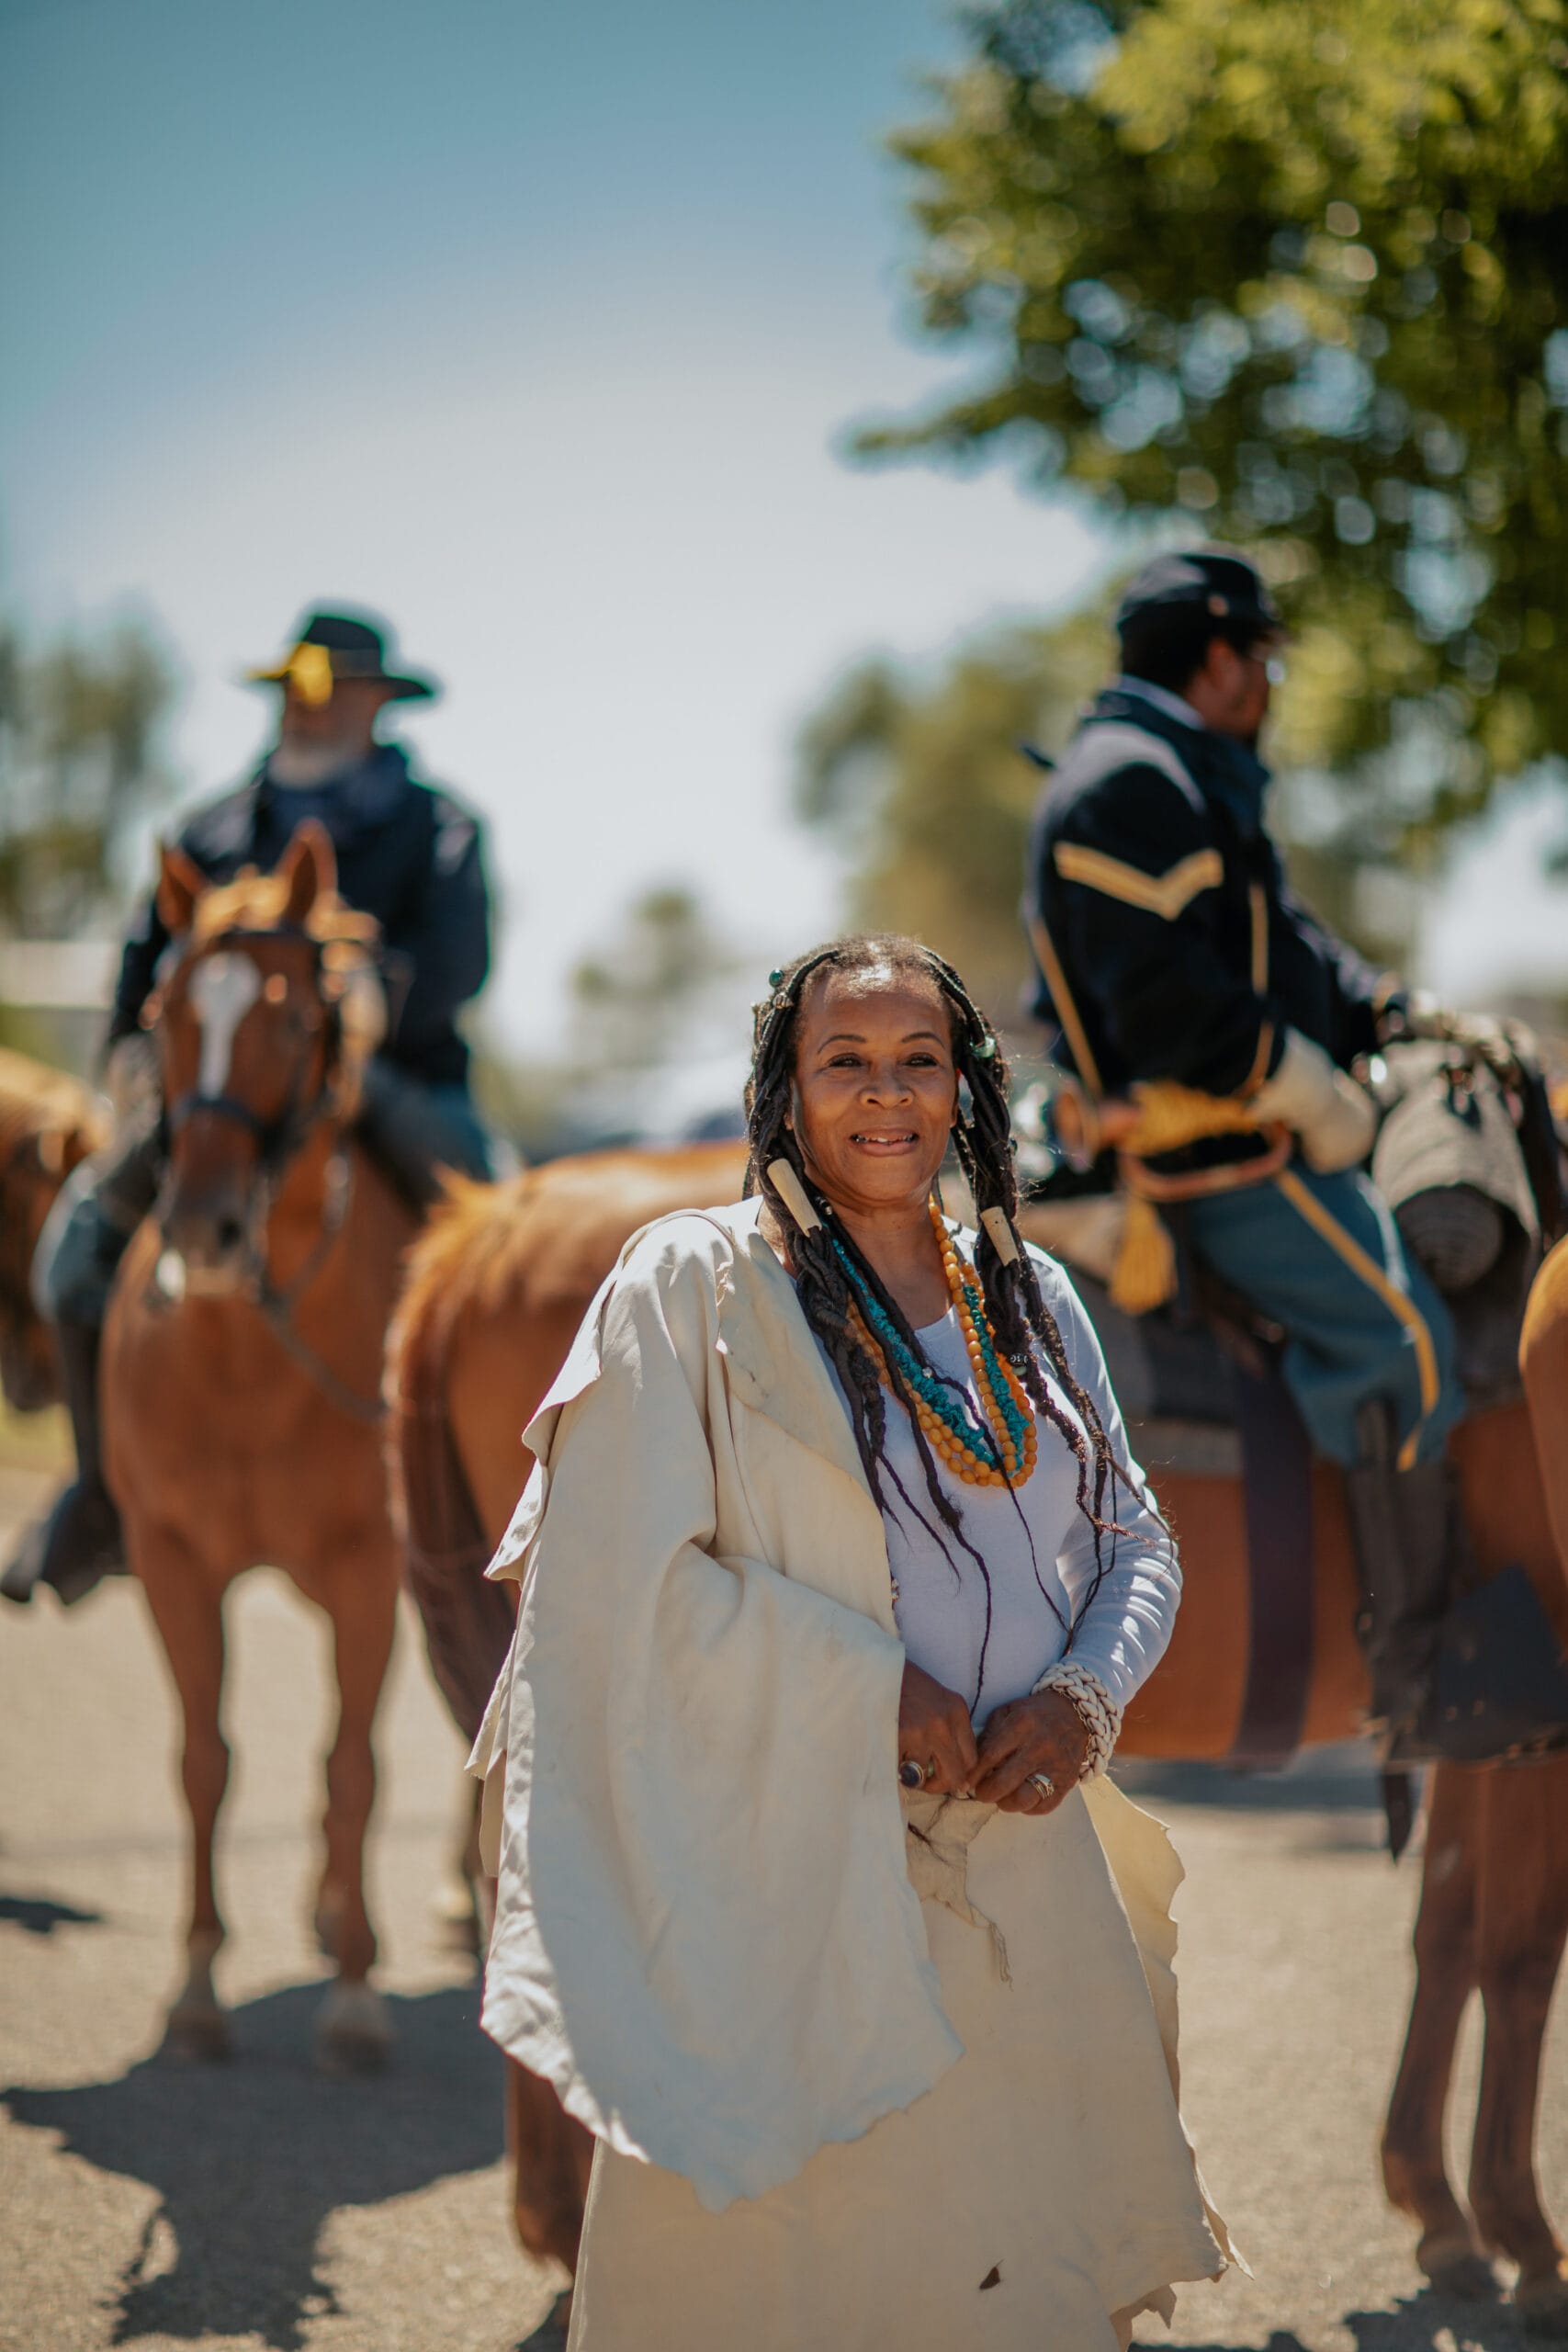 A woman is standing next to a group of horses.